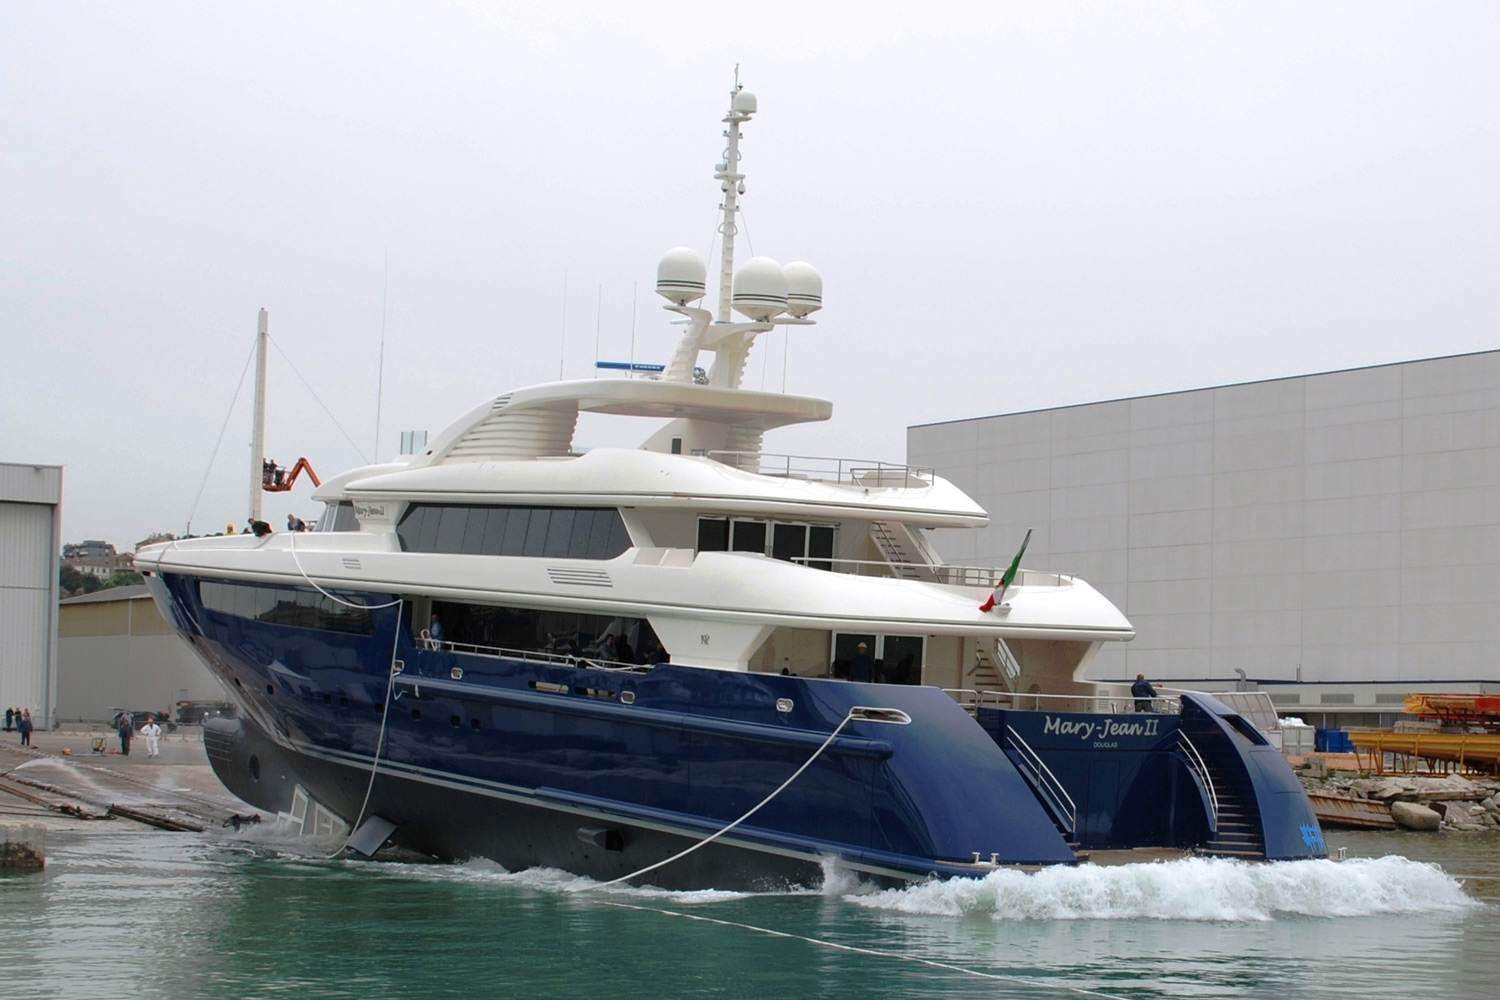 Mary-Jean II
2010 Motor Yacht Mary-Jean II launched by ISA